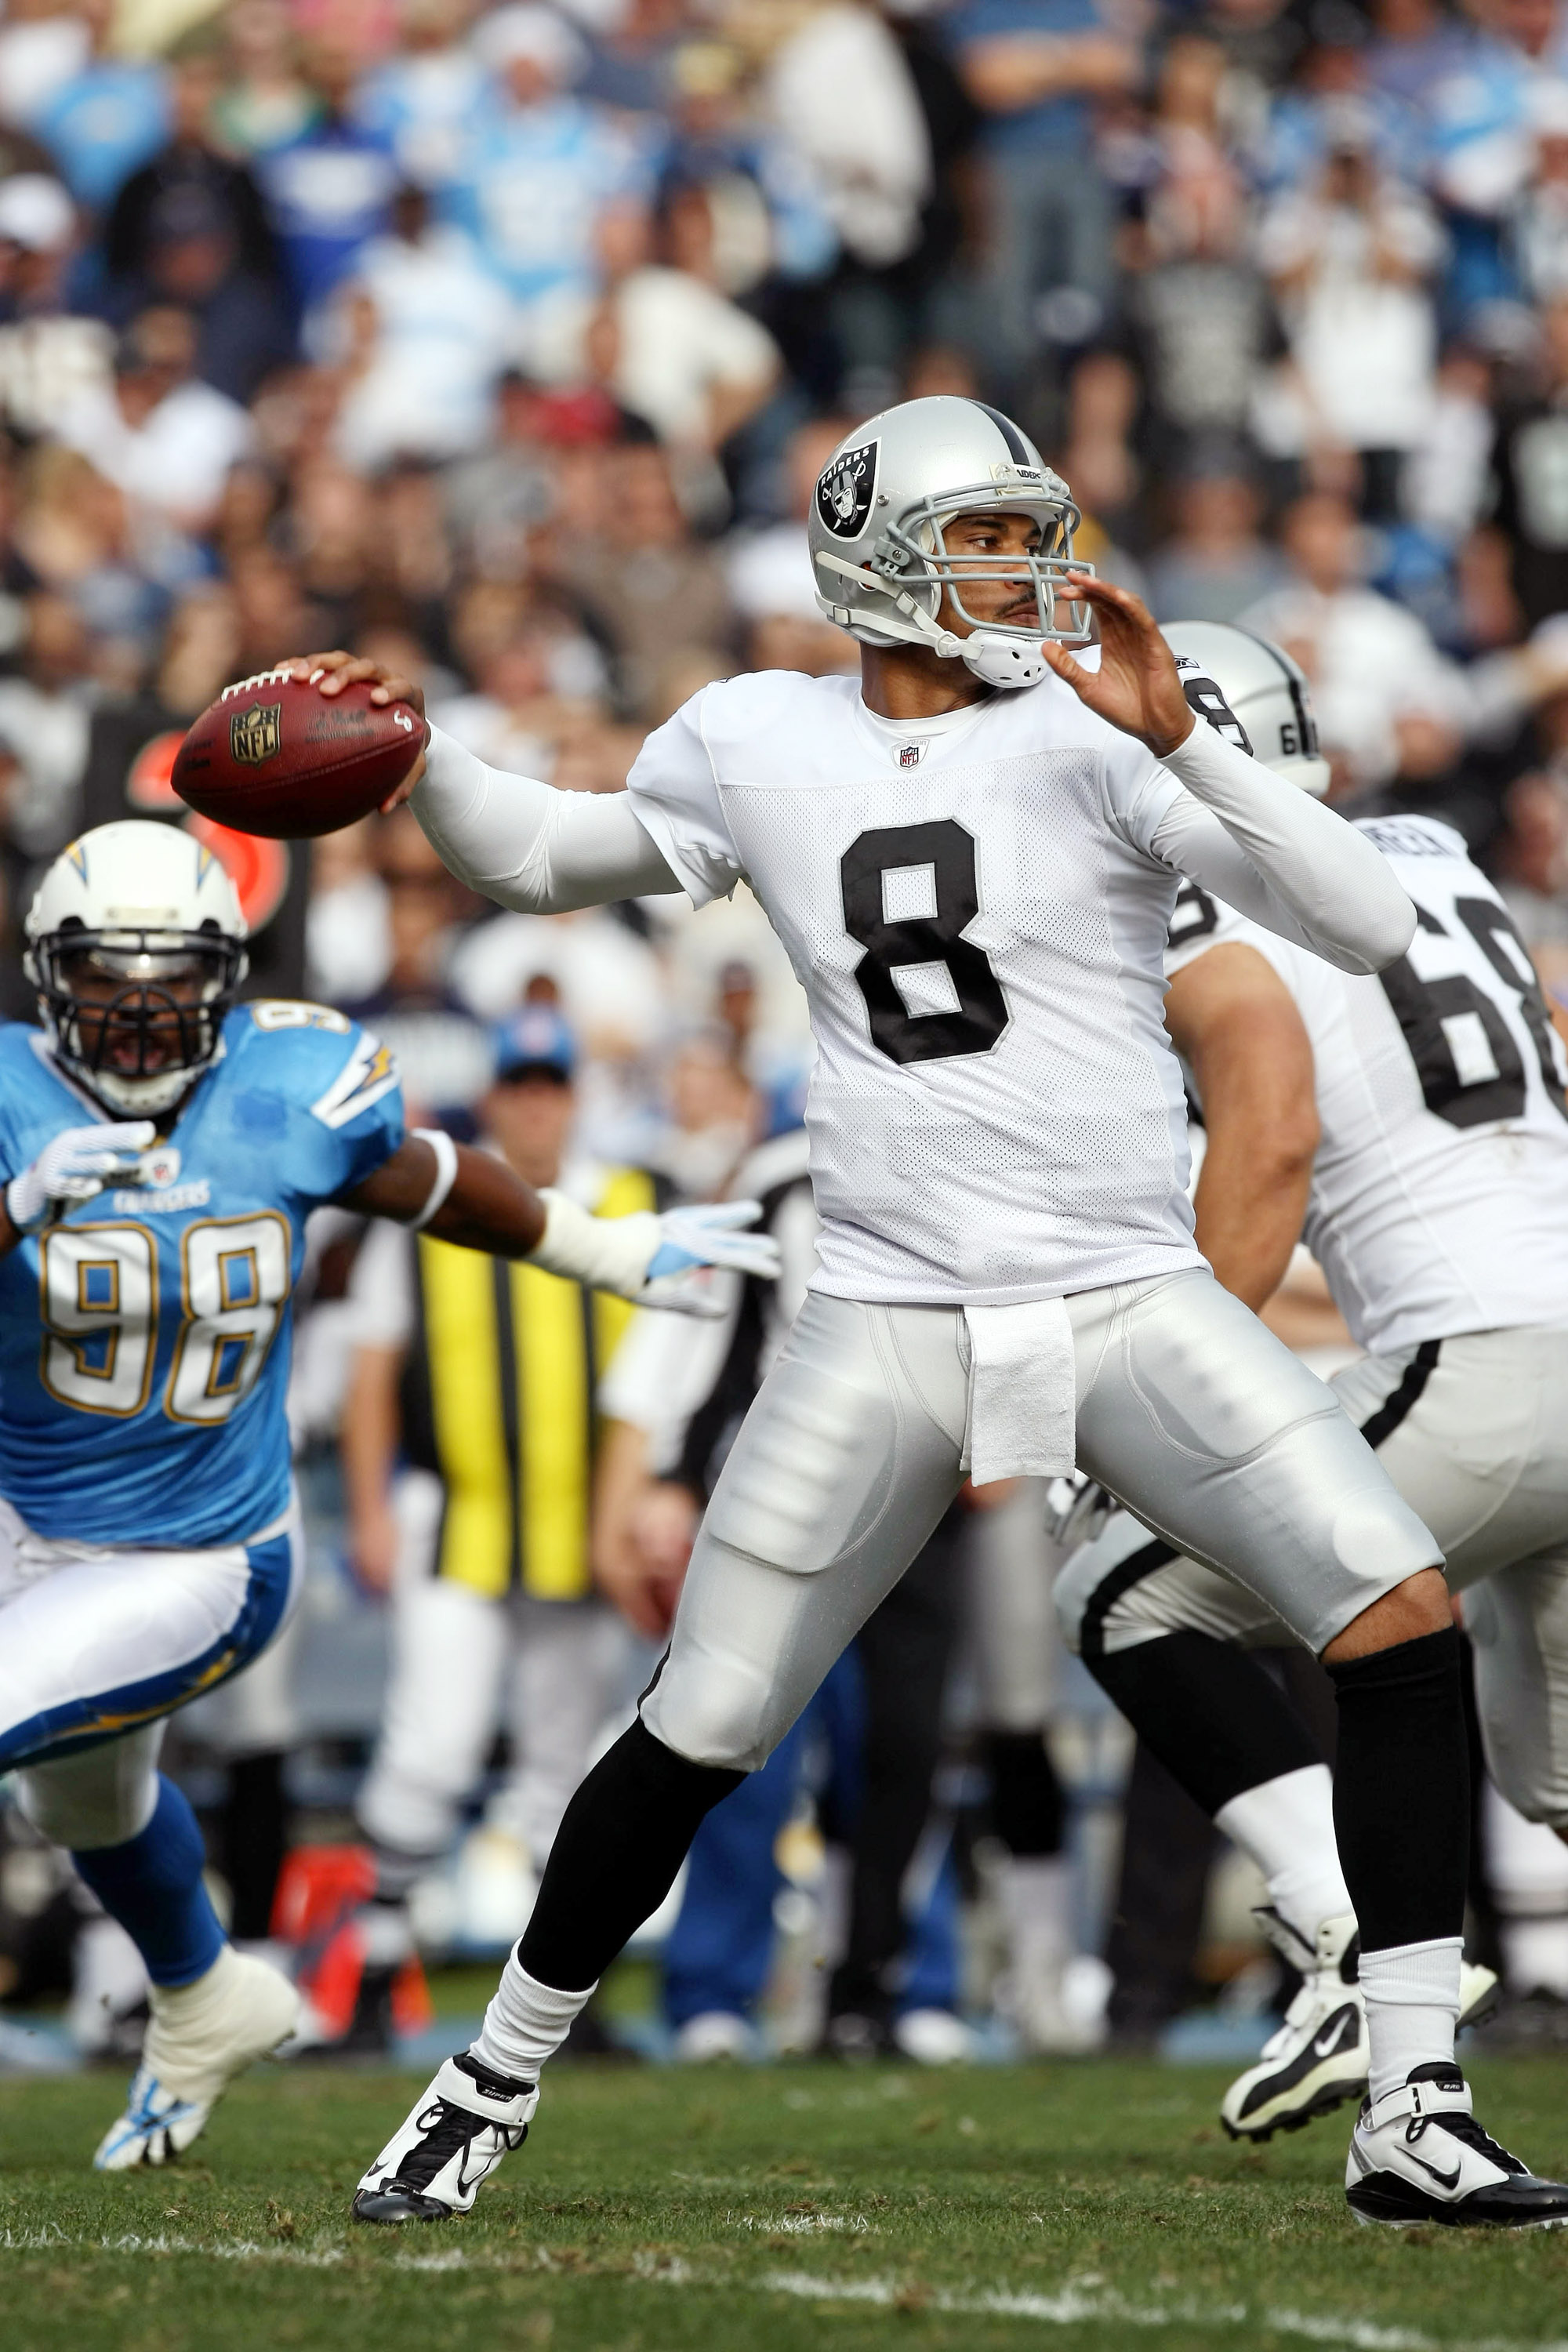 SAN DIEGO - DECEMBER 5: Quarterback Jason Campbell #8 of the Oakland Raiders throws the ball from the pocket against the San Diego Chargers during their NFL game at Qualcomm Stadium on December 5, 2010 in San Diego, California. (Photo by Donald Miralle/Ge